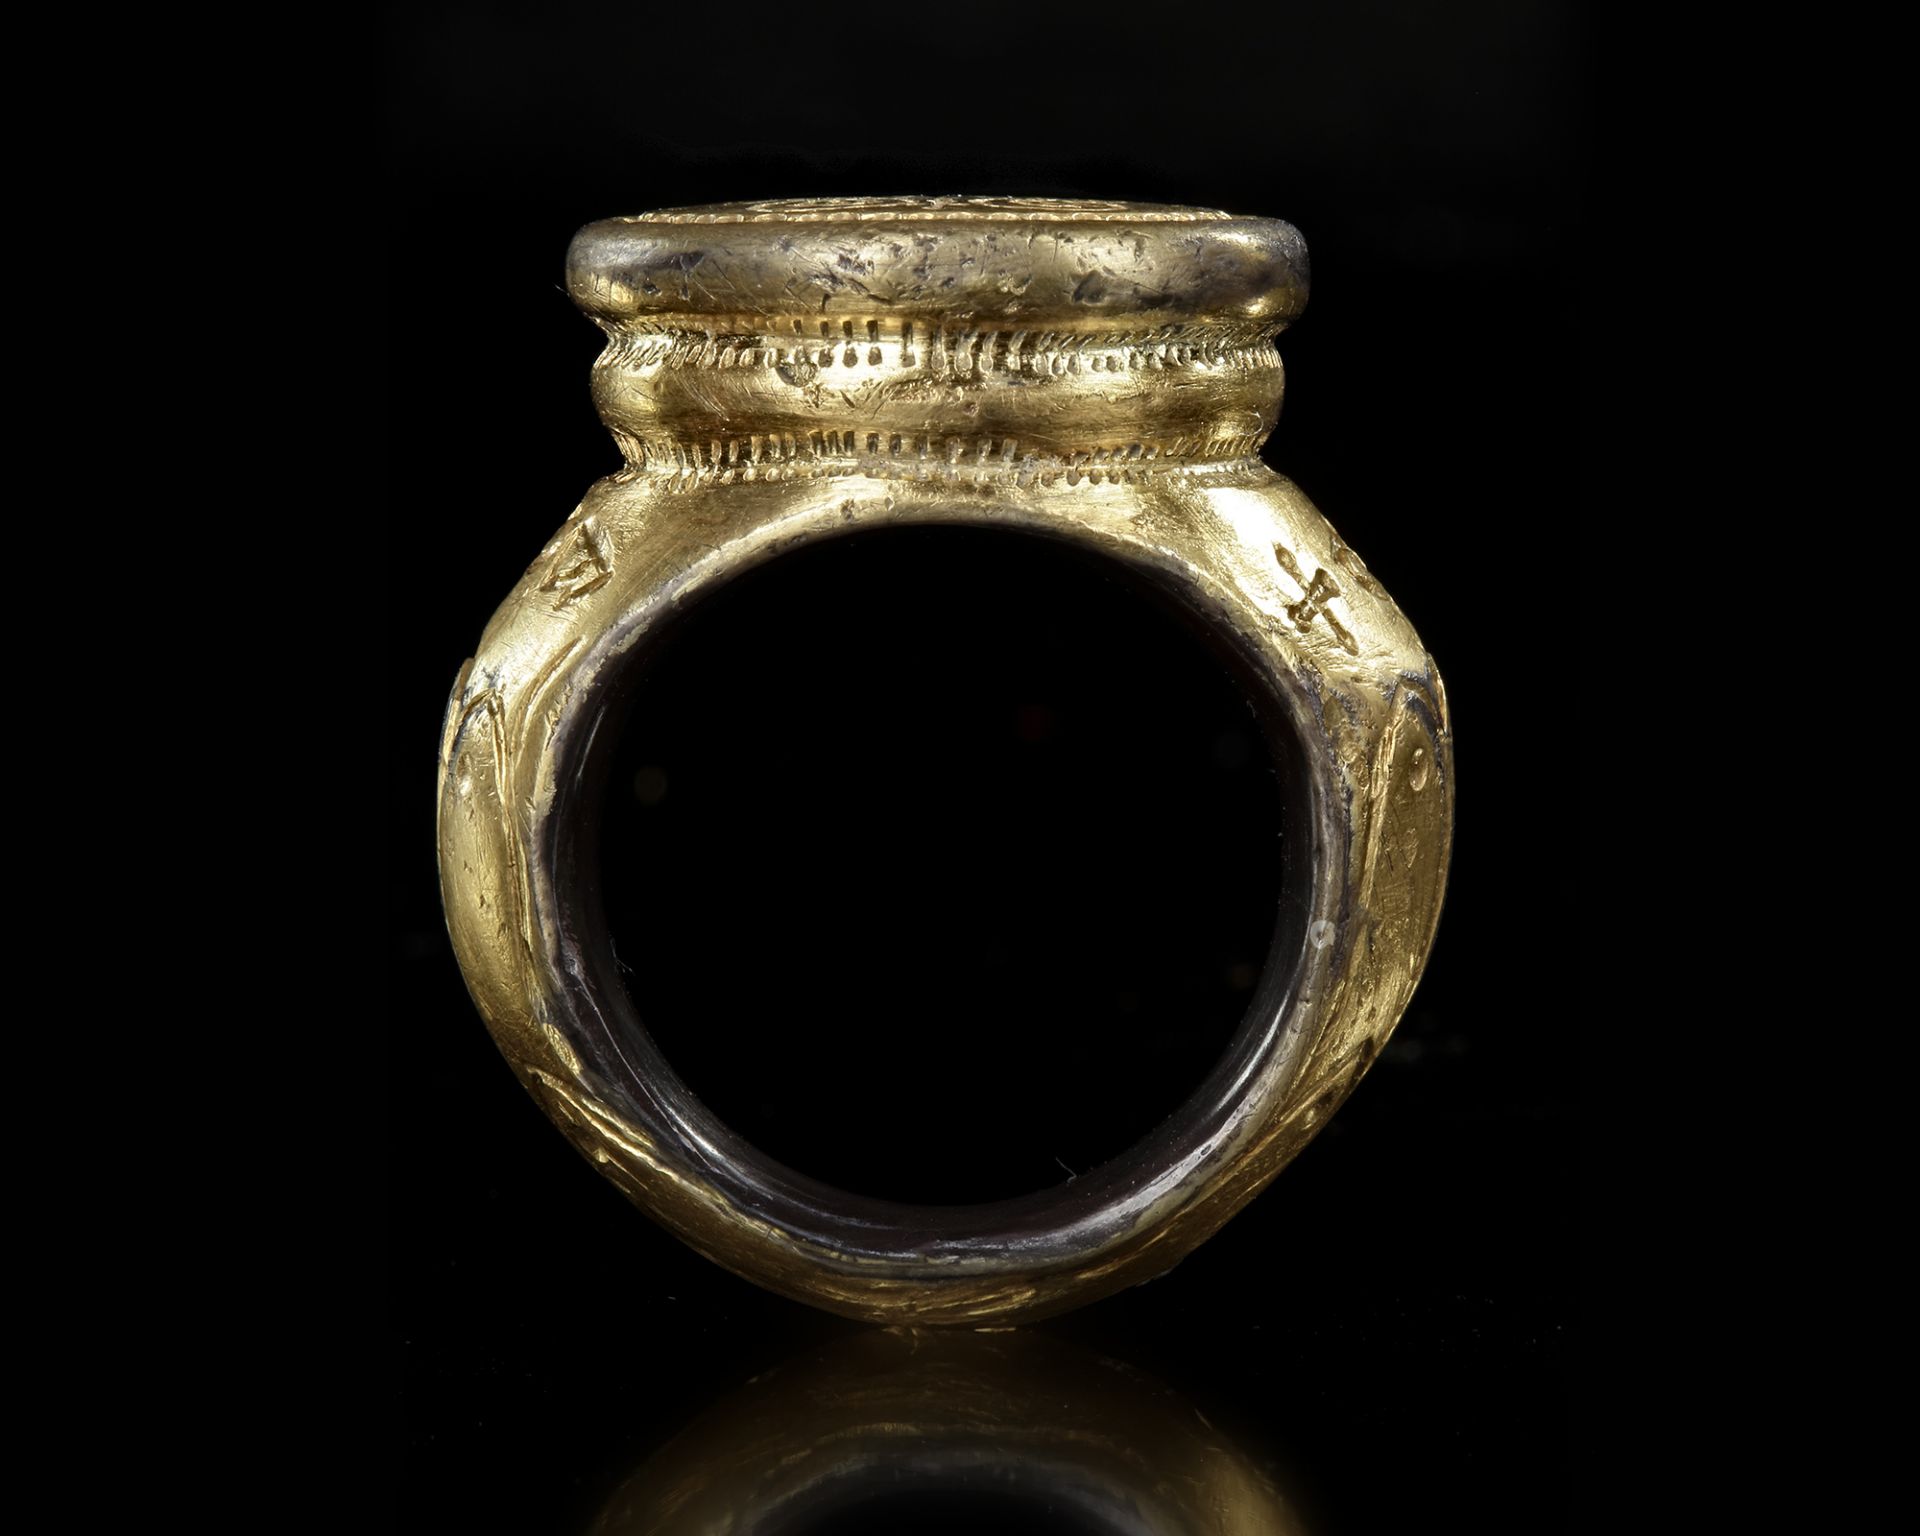 A LARGE SILVER GILT BYZANTINE RING, 8TH-10TH CENTURY AD - Image 2 of 5